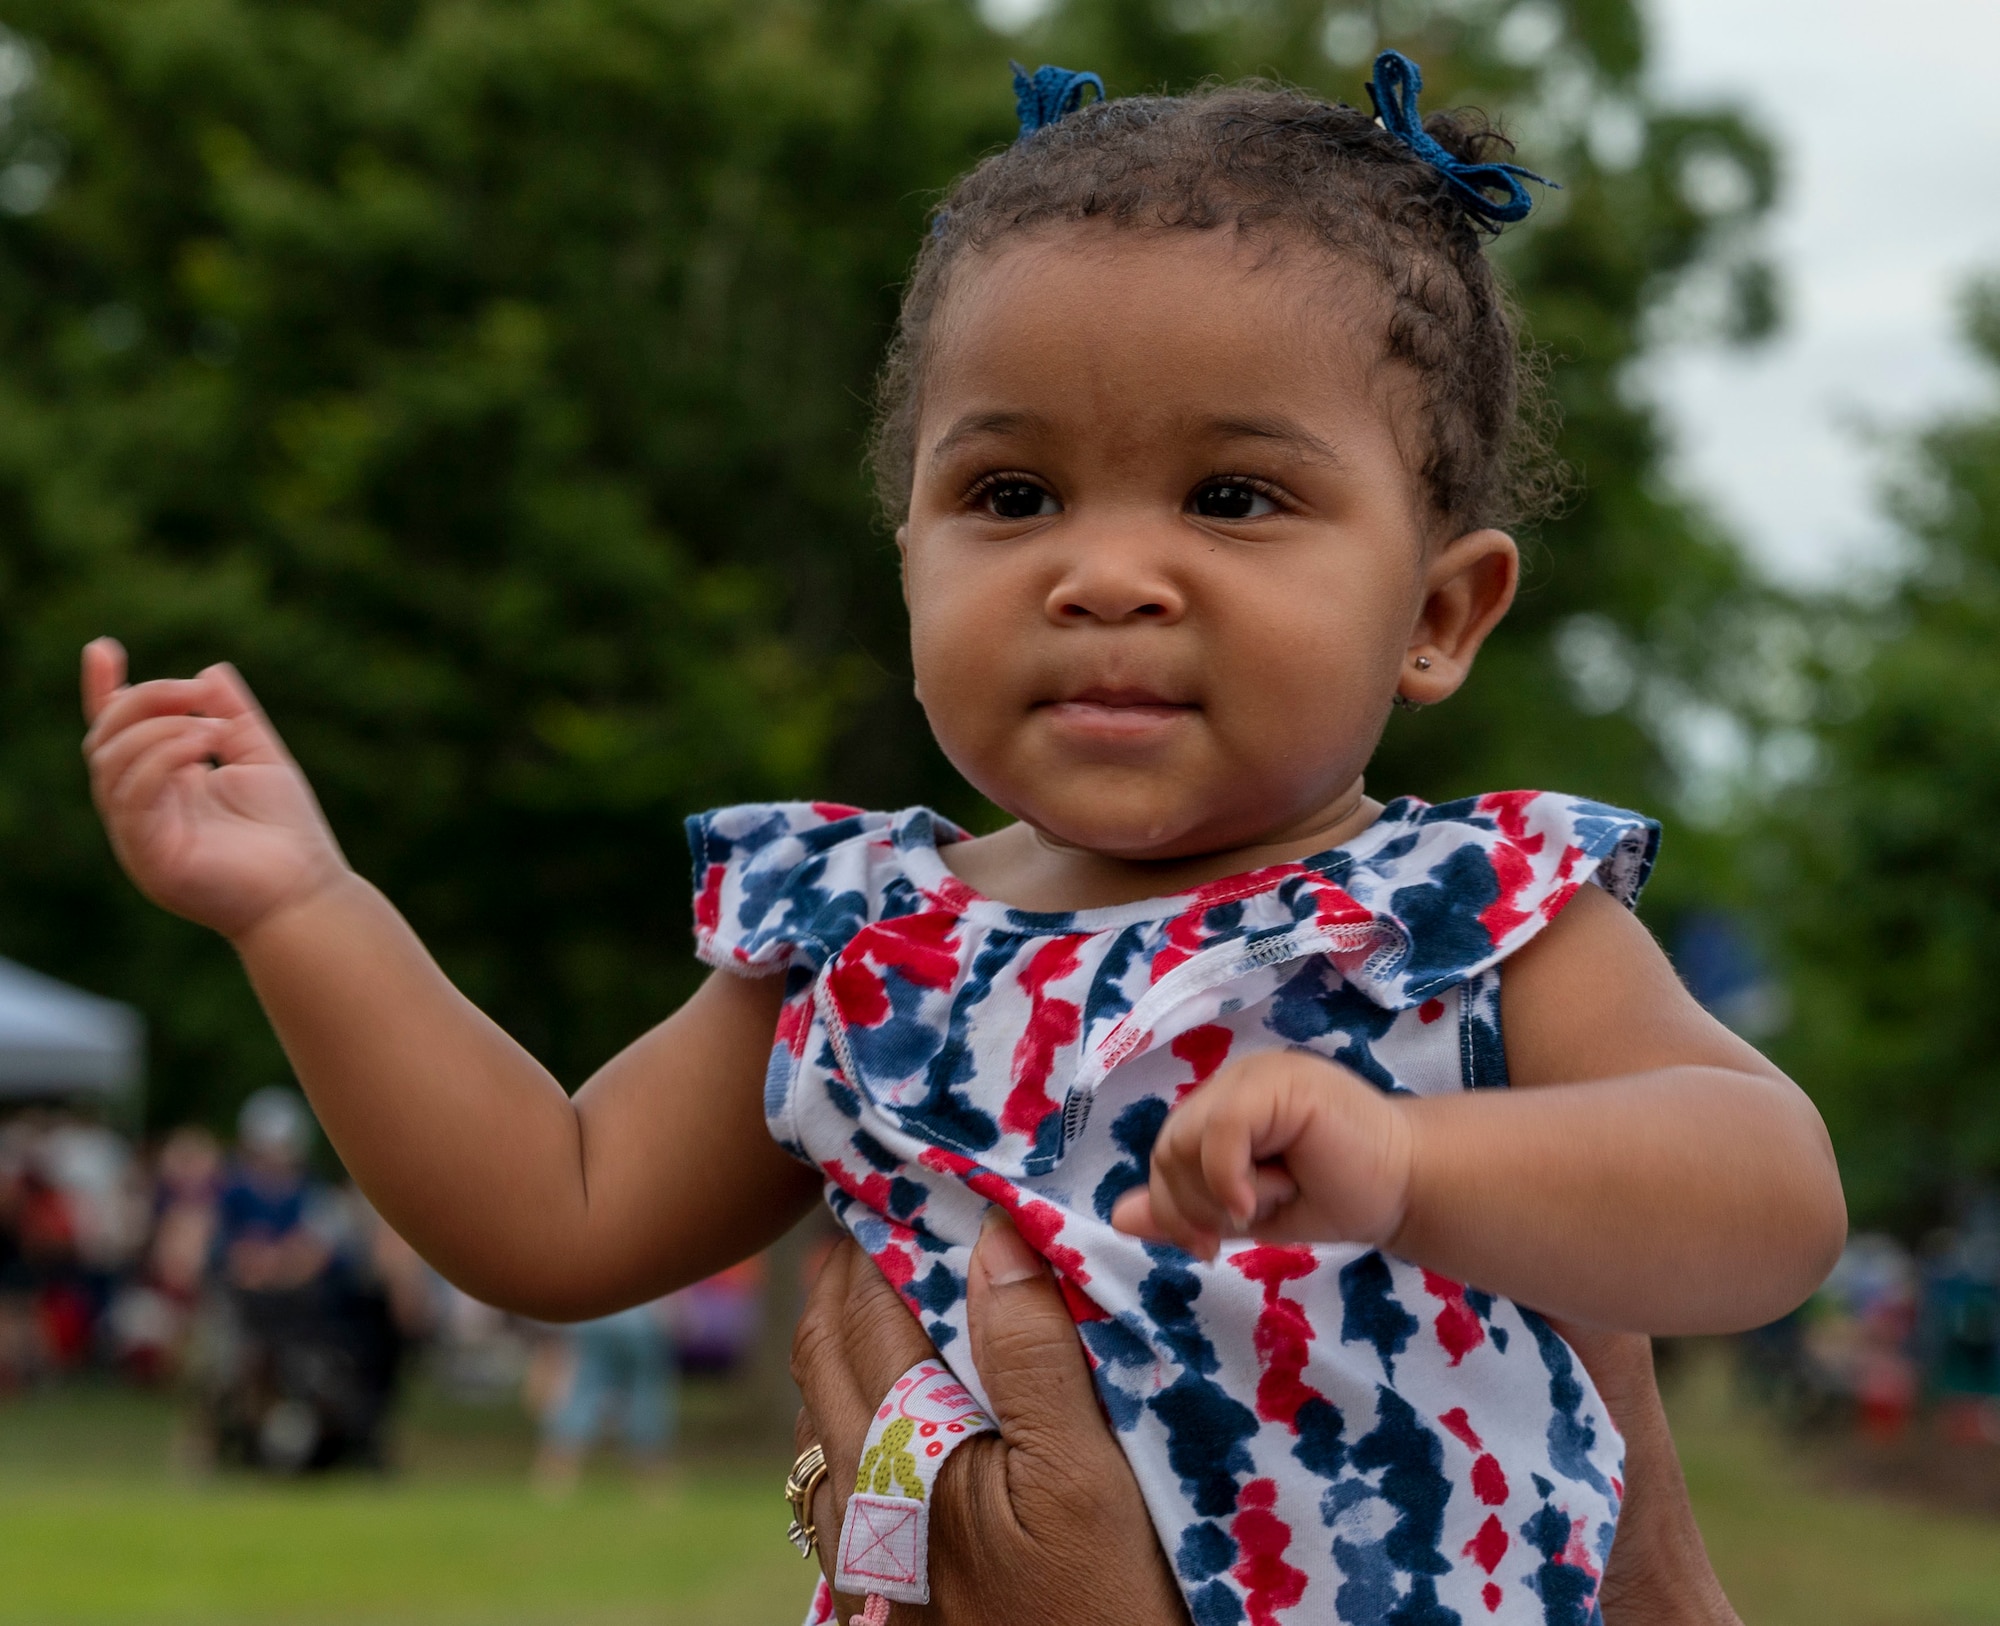 A member of Team Seymour attends a 4th of July celebration at Seymour Johnson Air Force Base, North Carolina, June 30, 2022.